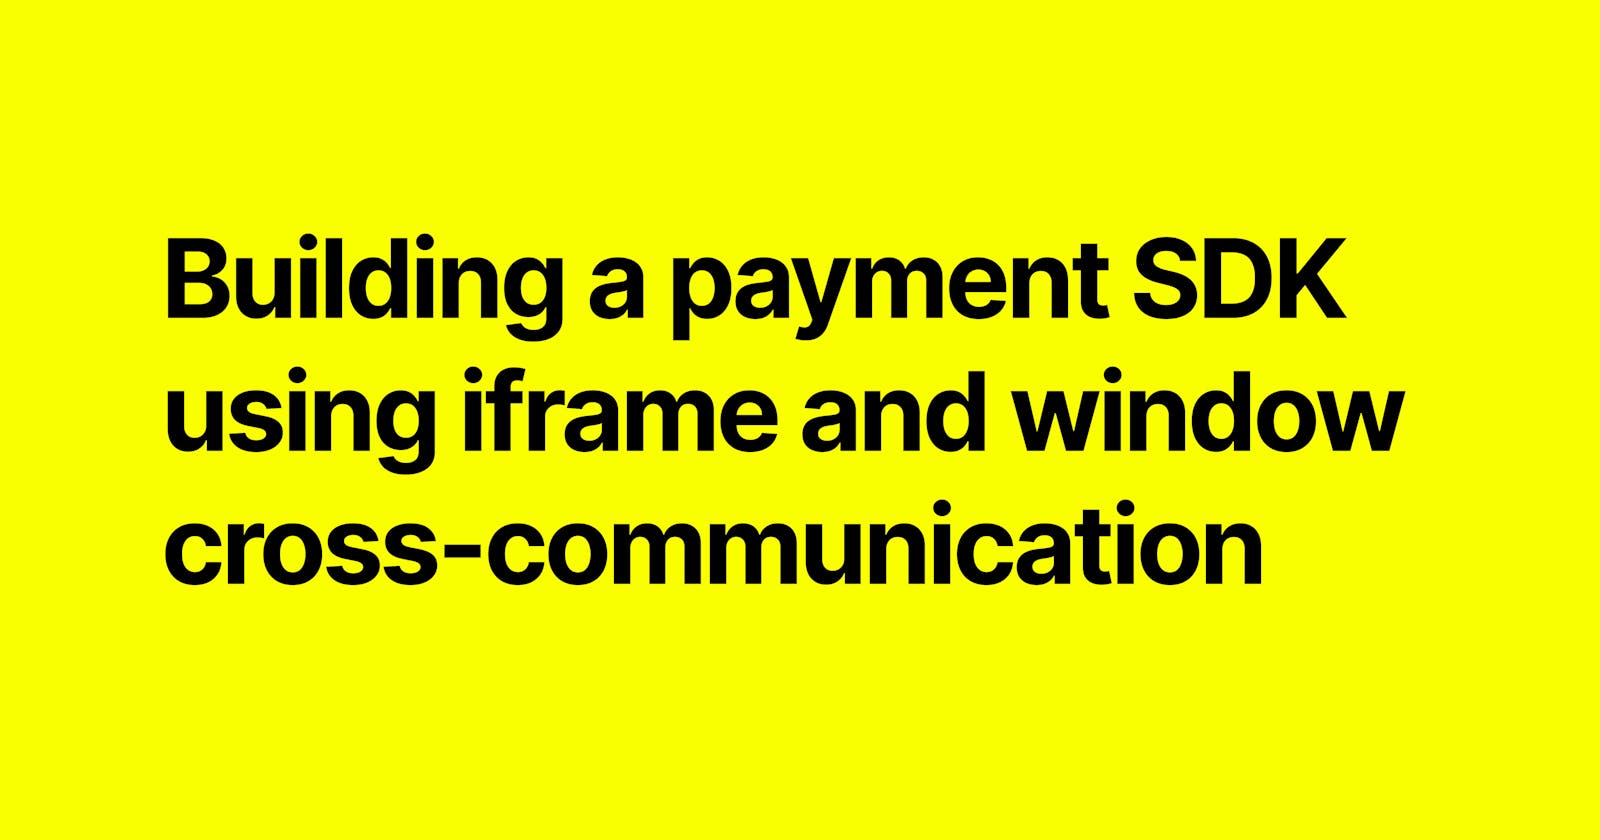 Building a payment SDK using iframe and window cross-communication